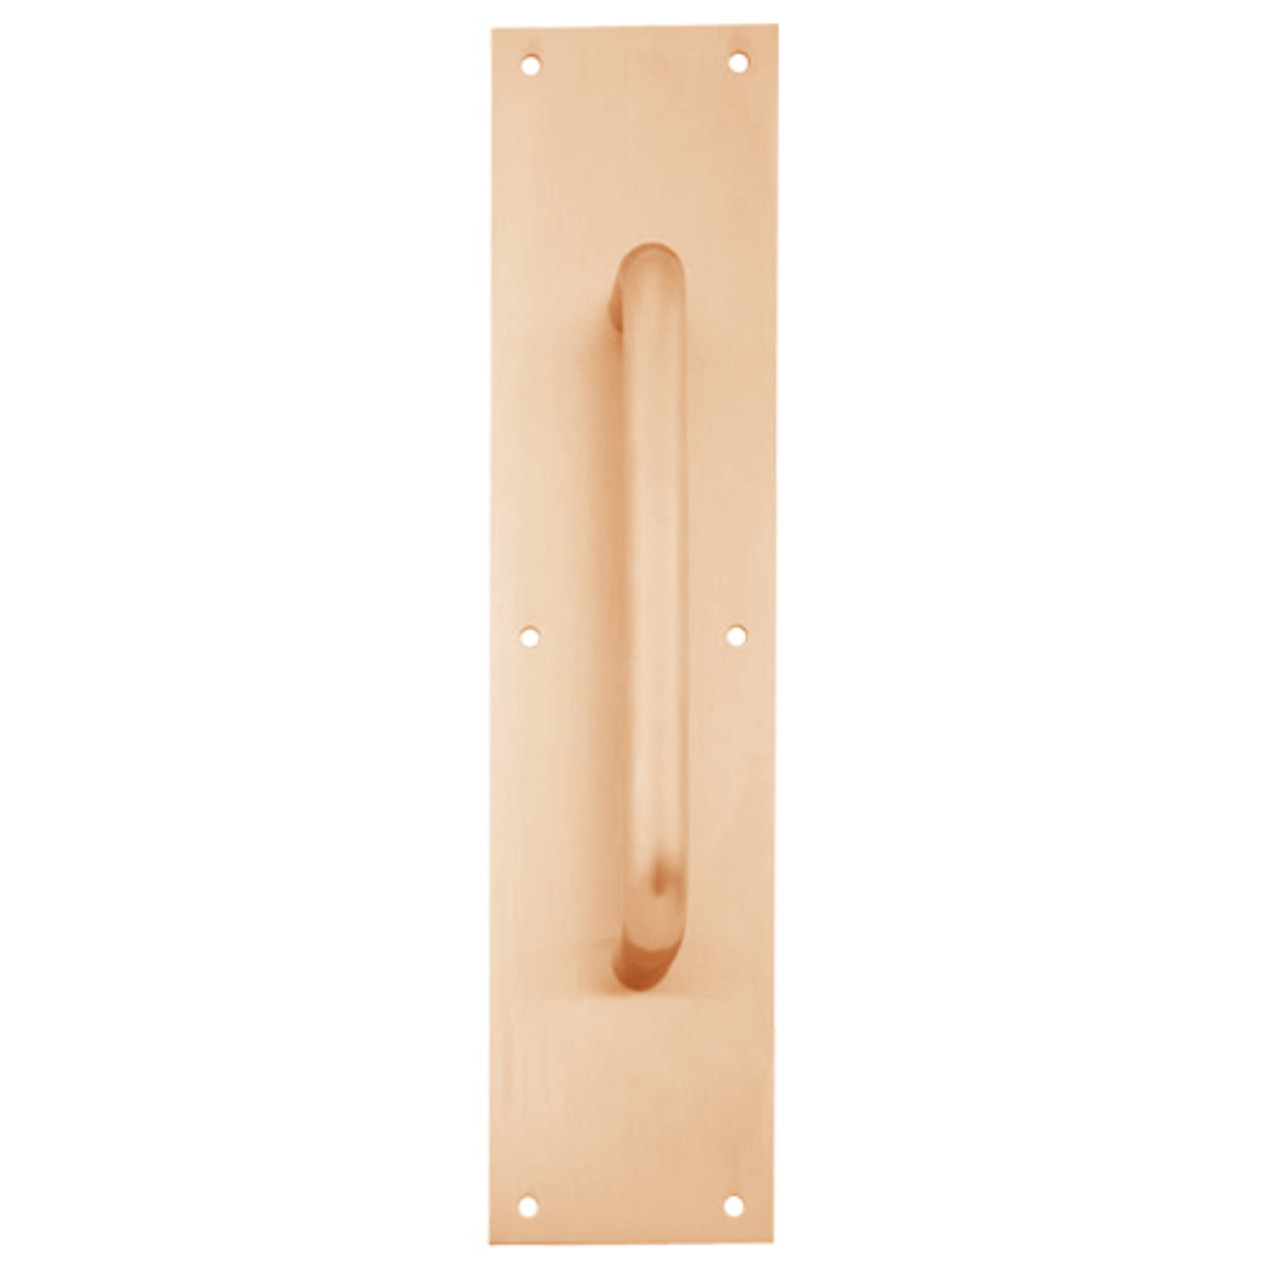 8302-10-US10-3-5x15 IVES Architectural Door Trim 3.5x15 Inch Pull Plate in Satin Bronze